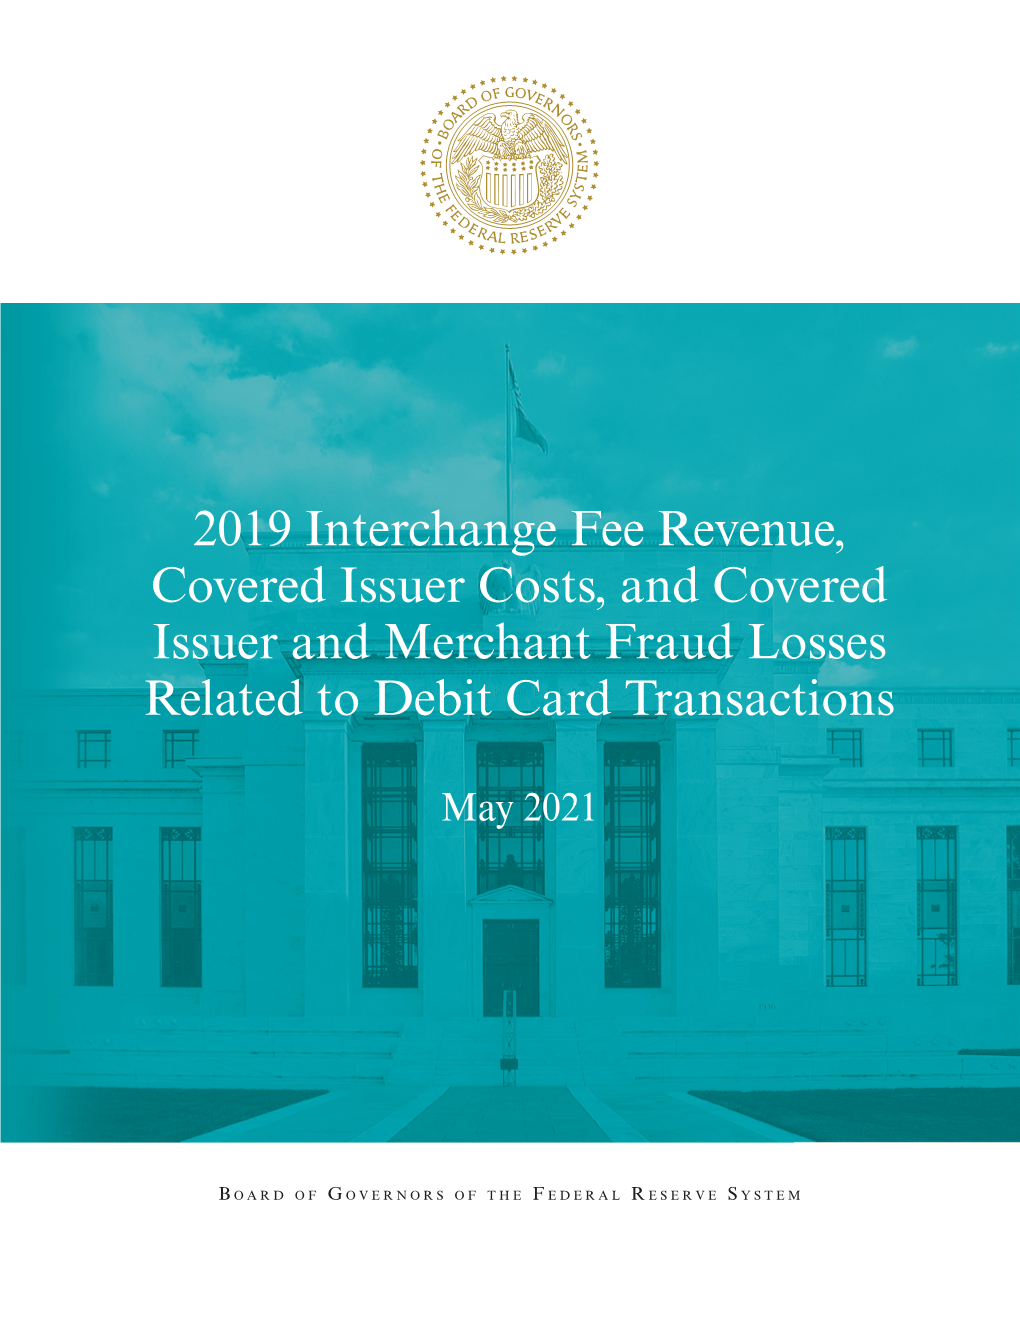 2019 Interchange Fee Revenue, Covered Issuer Costs, and Covered Issuer and Merchant Fraud Losses Related to Debit Card Transactions